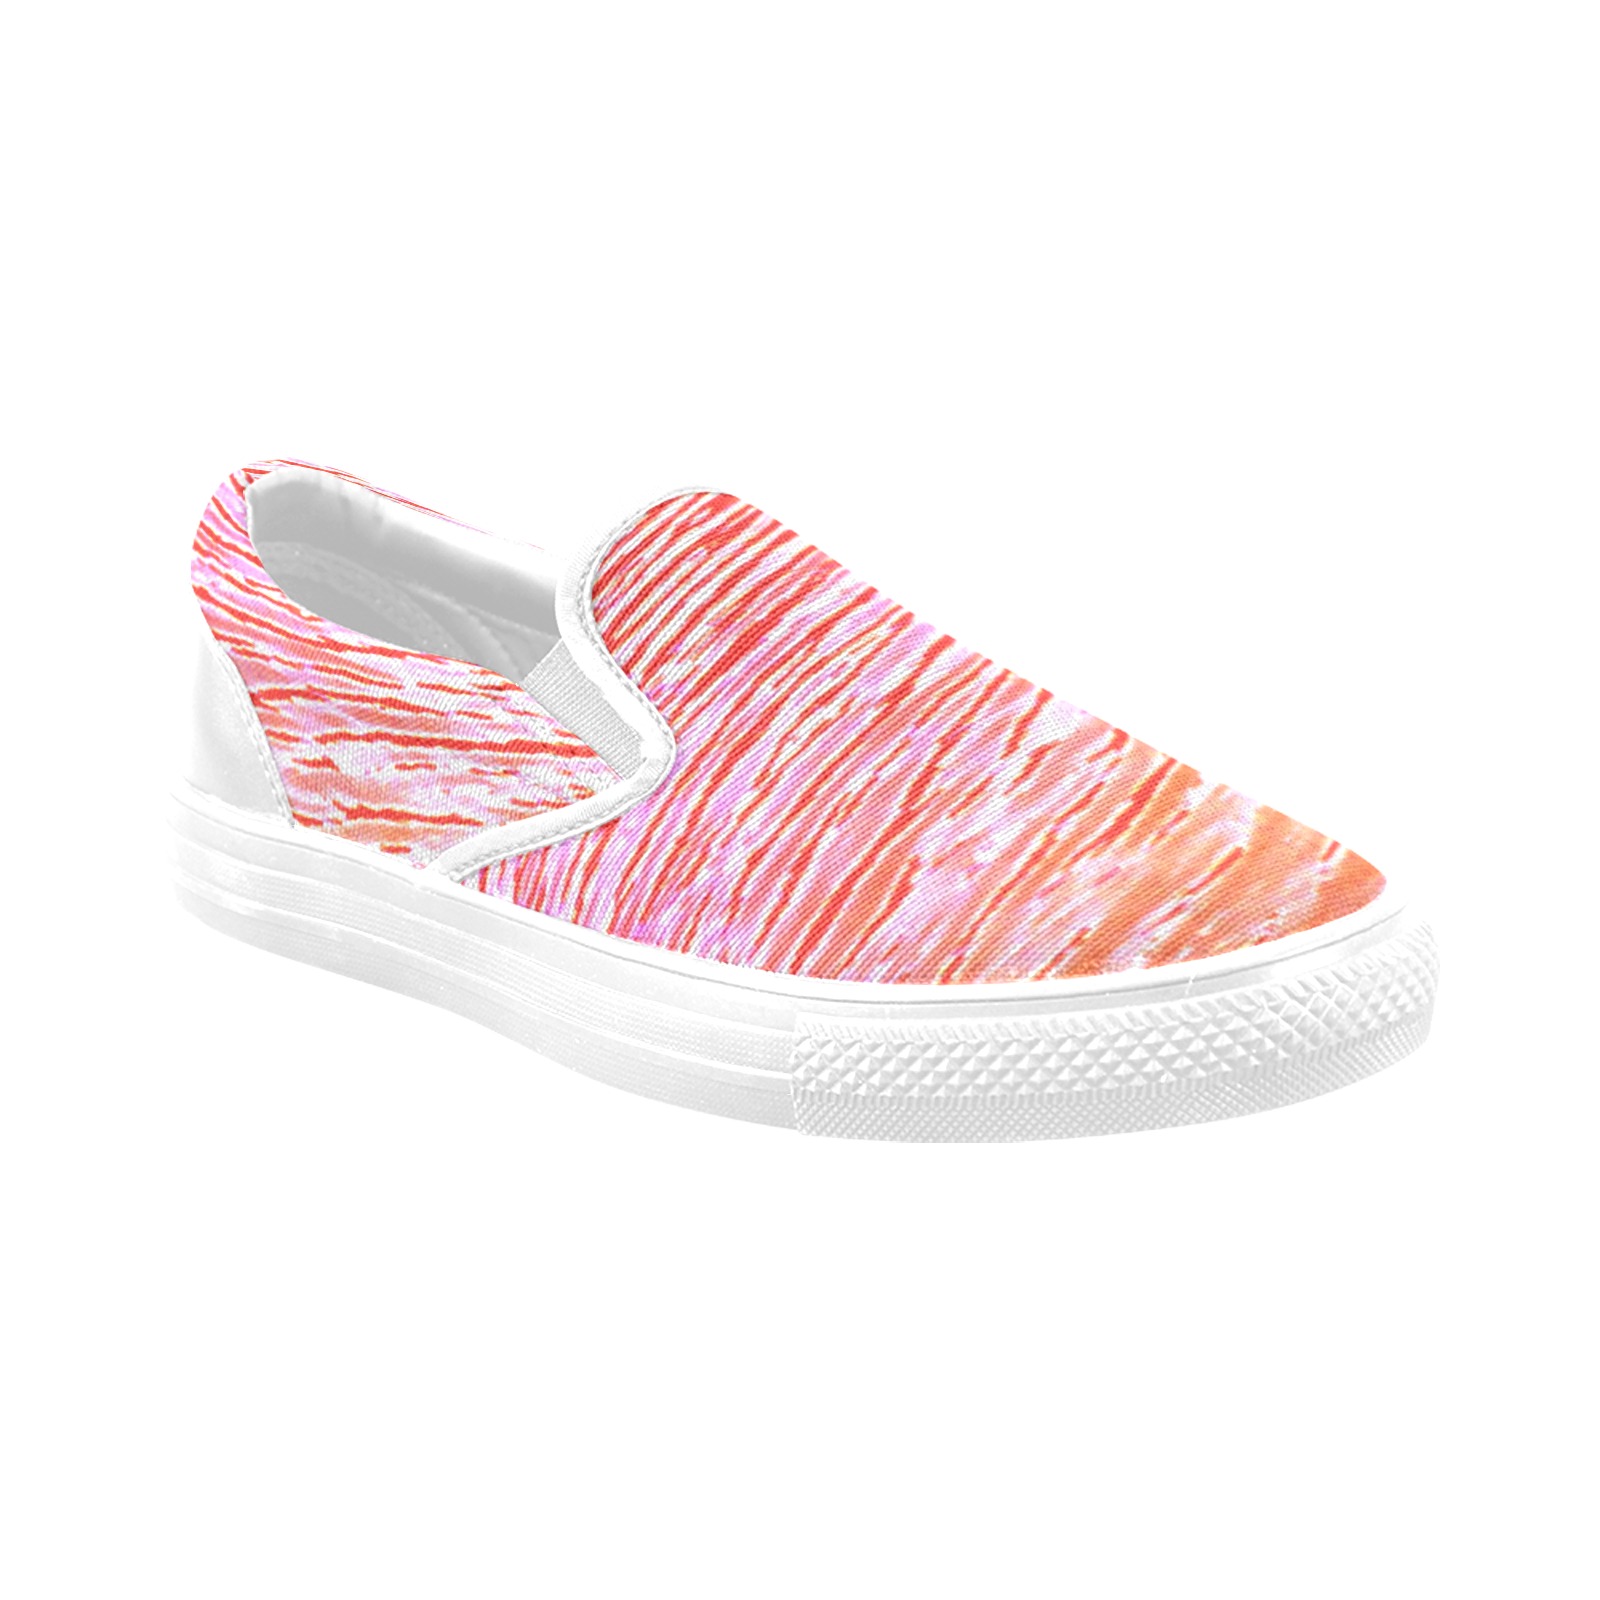 Orange and red water Women's Unusual Slip-on Canvas Shoes (Model 019)